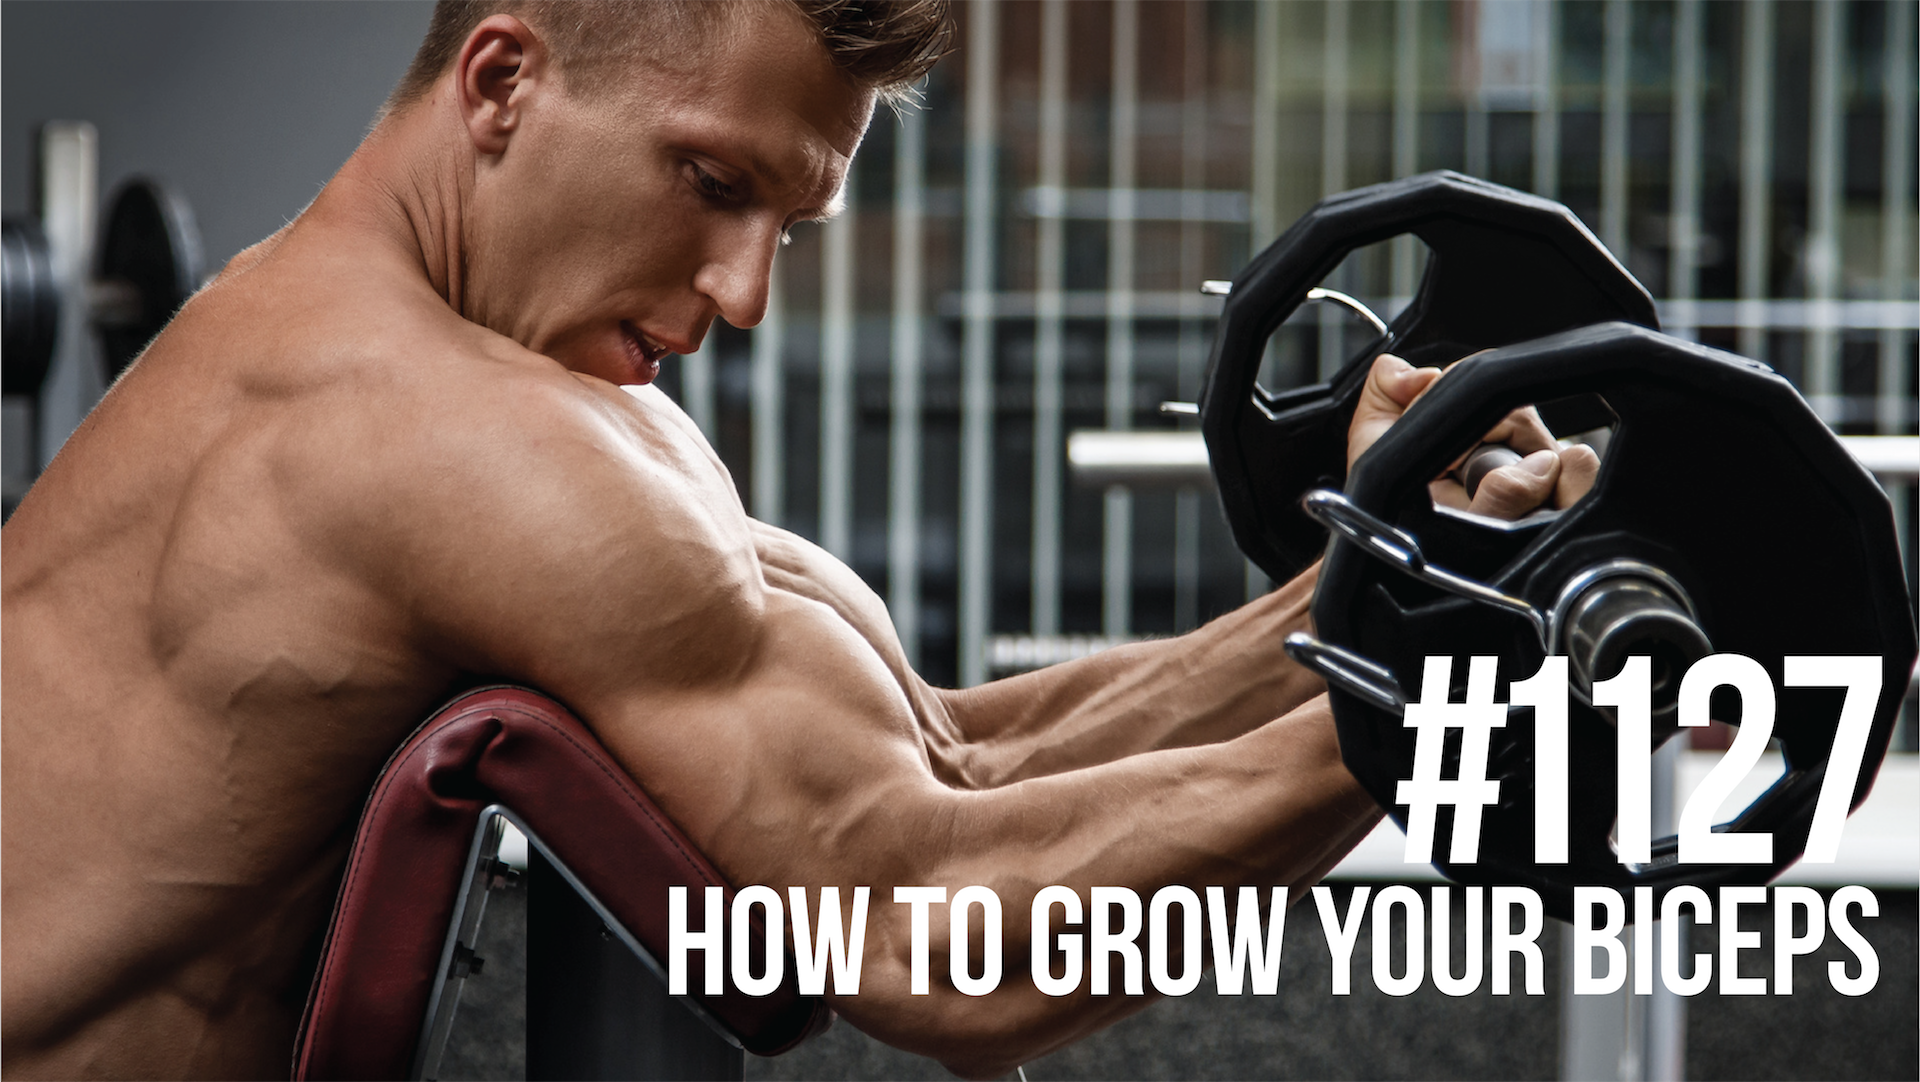 1127: How to Grow Your Biceps